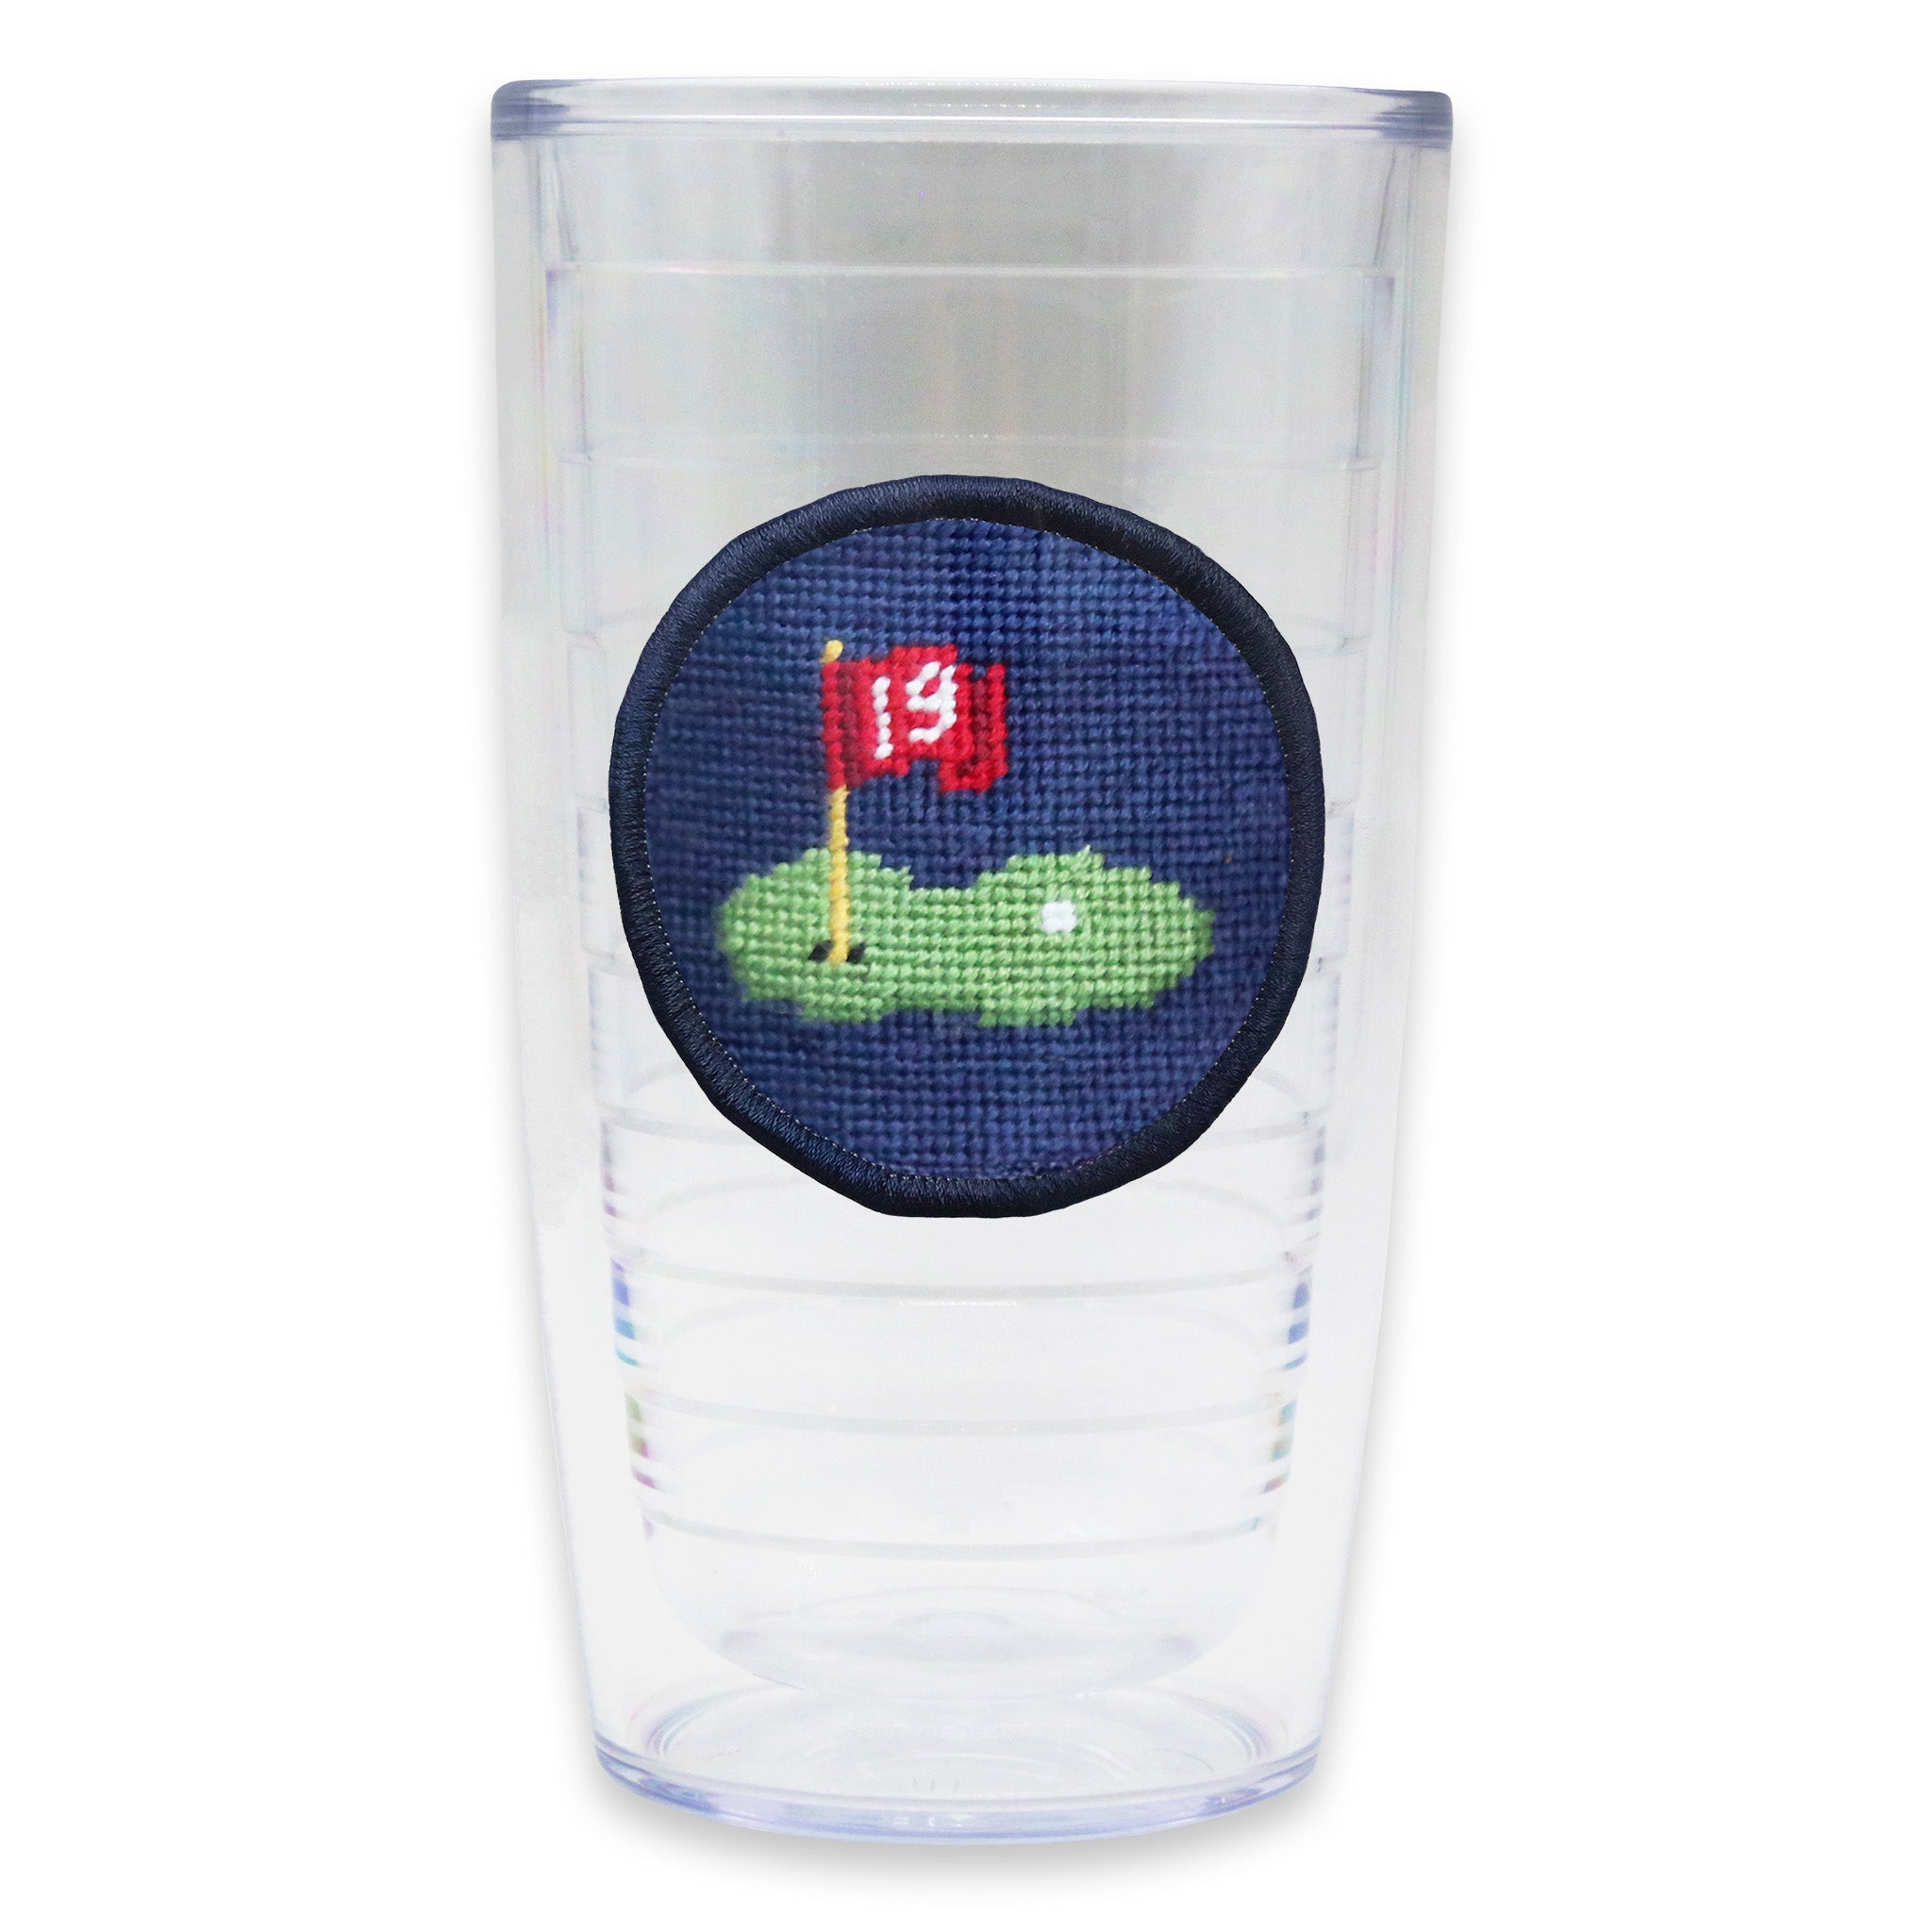 19th Hole Tervis Tumbler (Classic Navy)